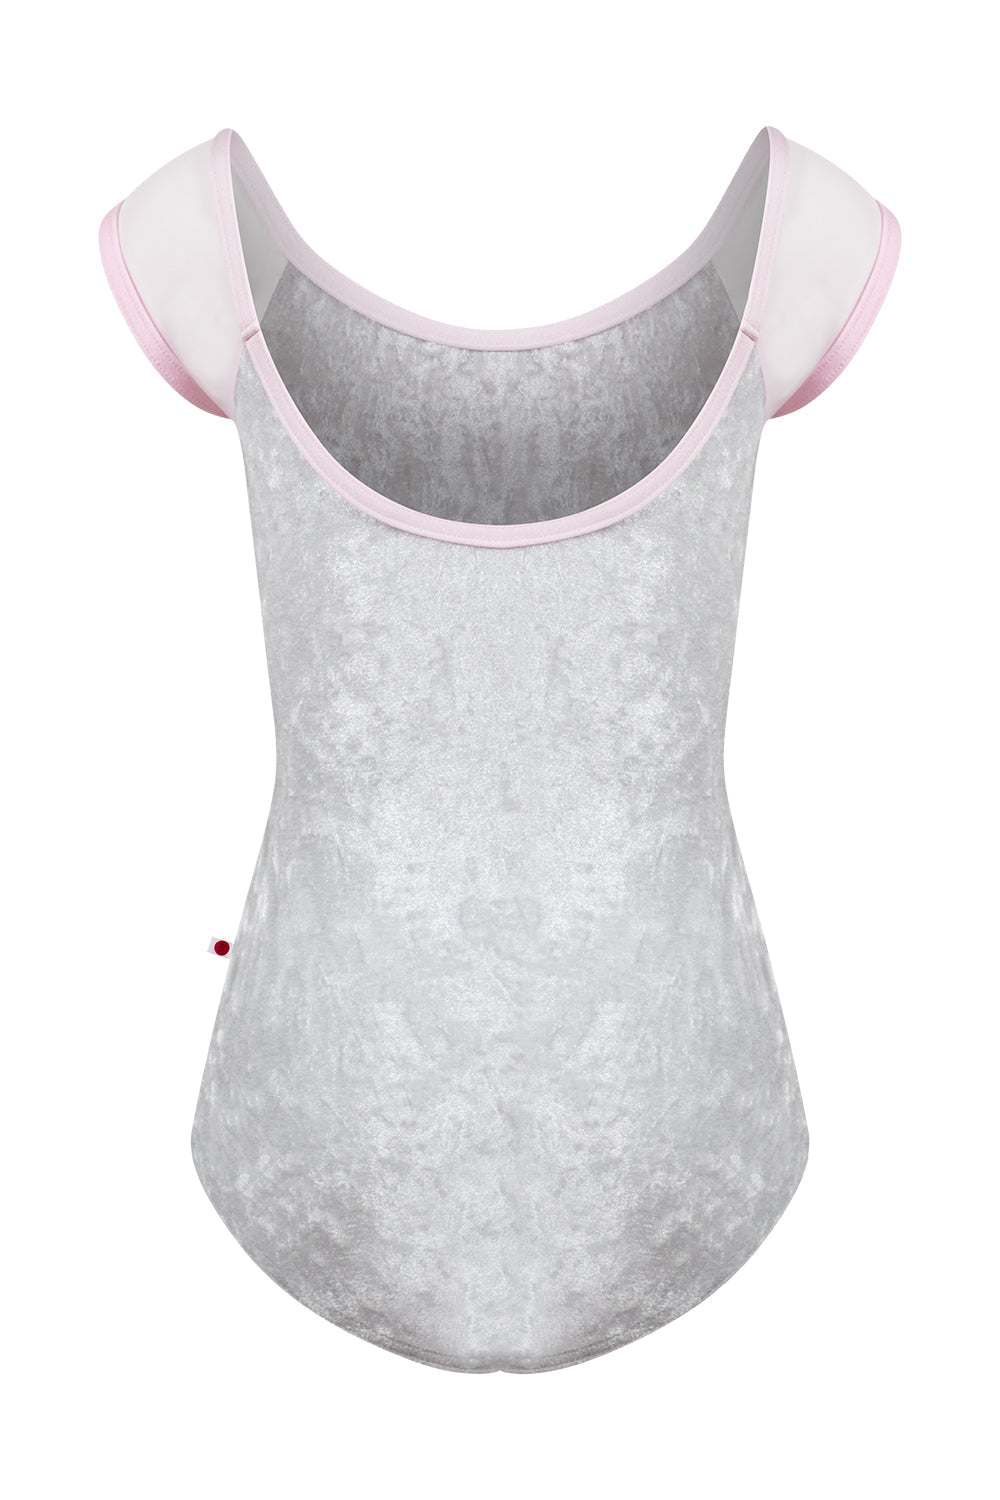 Kids Wendy leotard in CV-Silver body color with Mesh Rose cap sleeves and N-Rose trim color